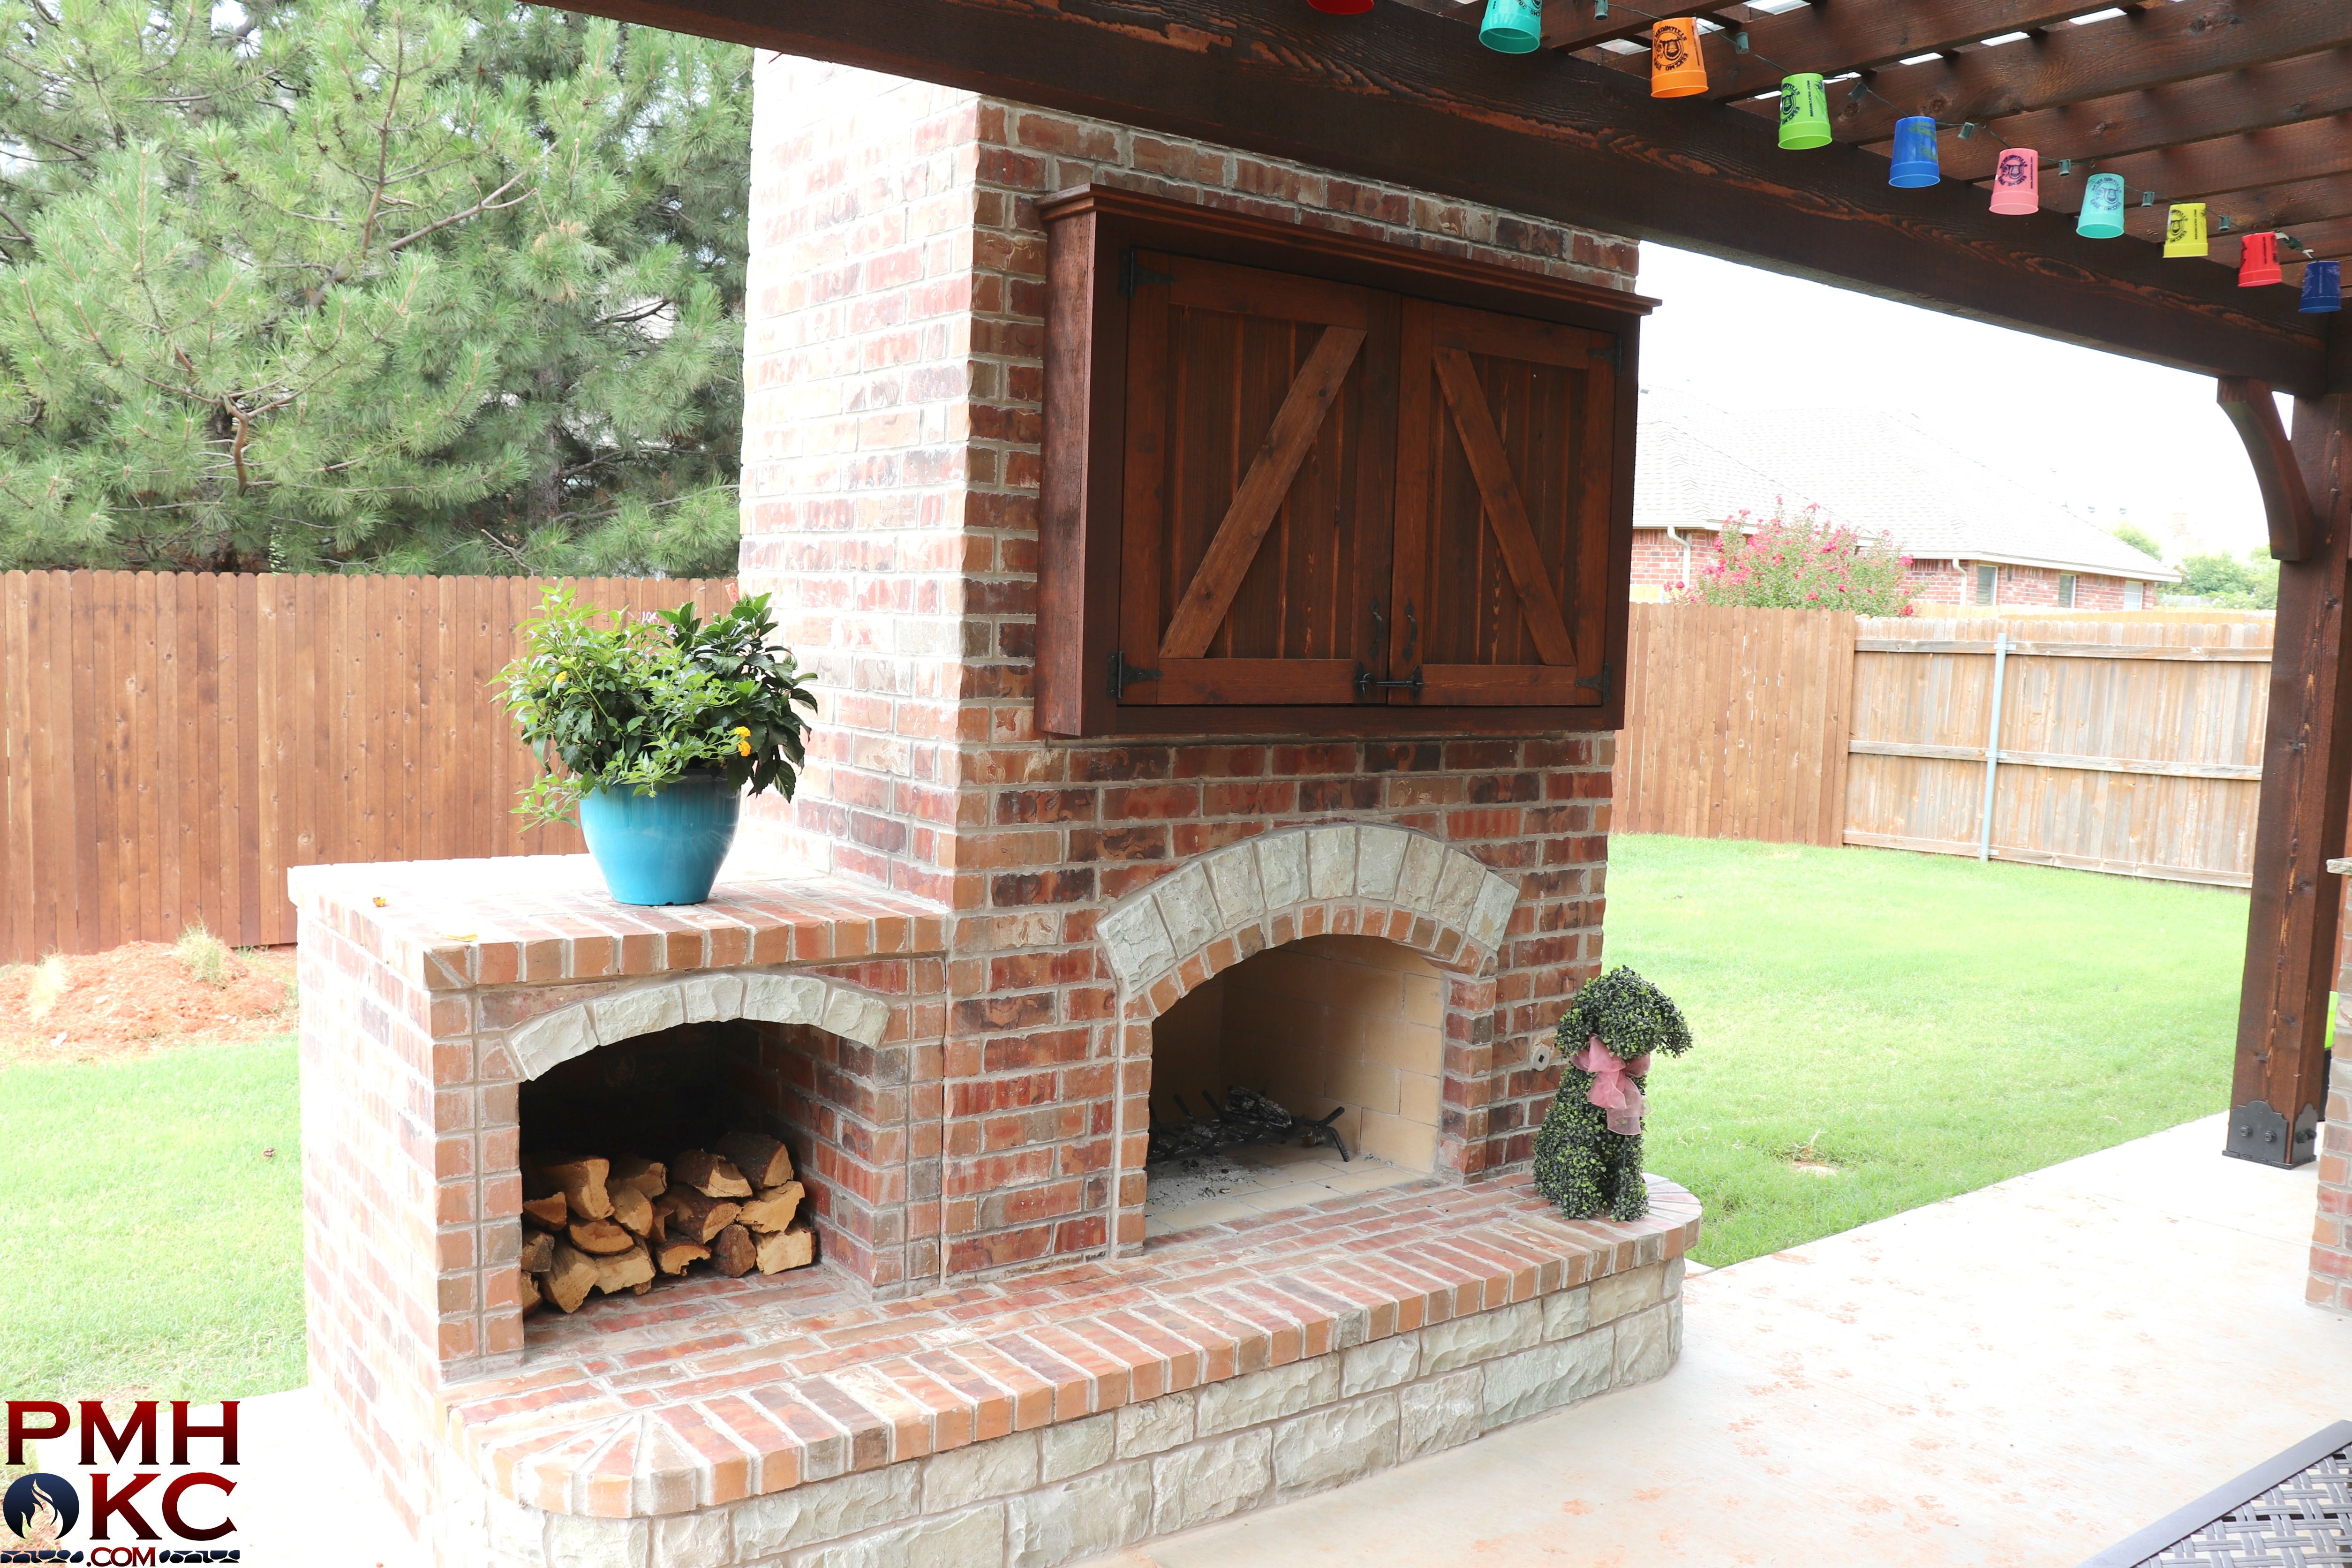 Outdoor Fireplace with Tv Unique Custom Made Brick Fireplace with A Firewood Holder and Tv